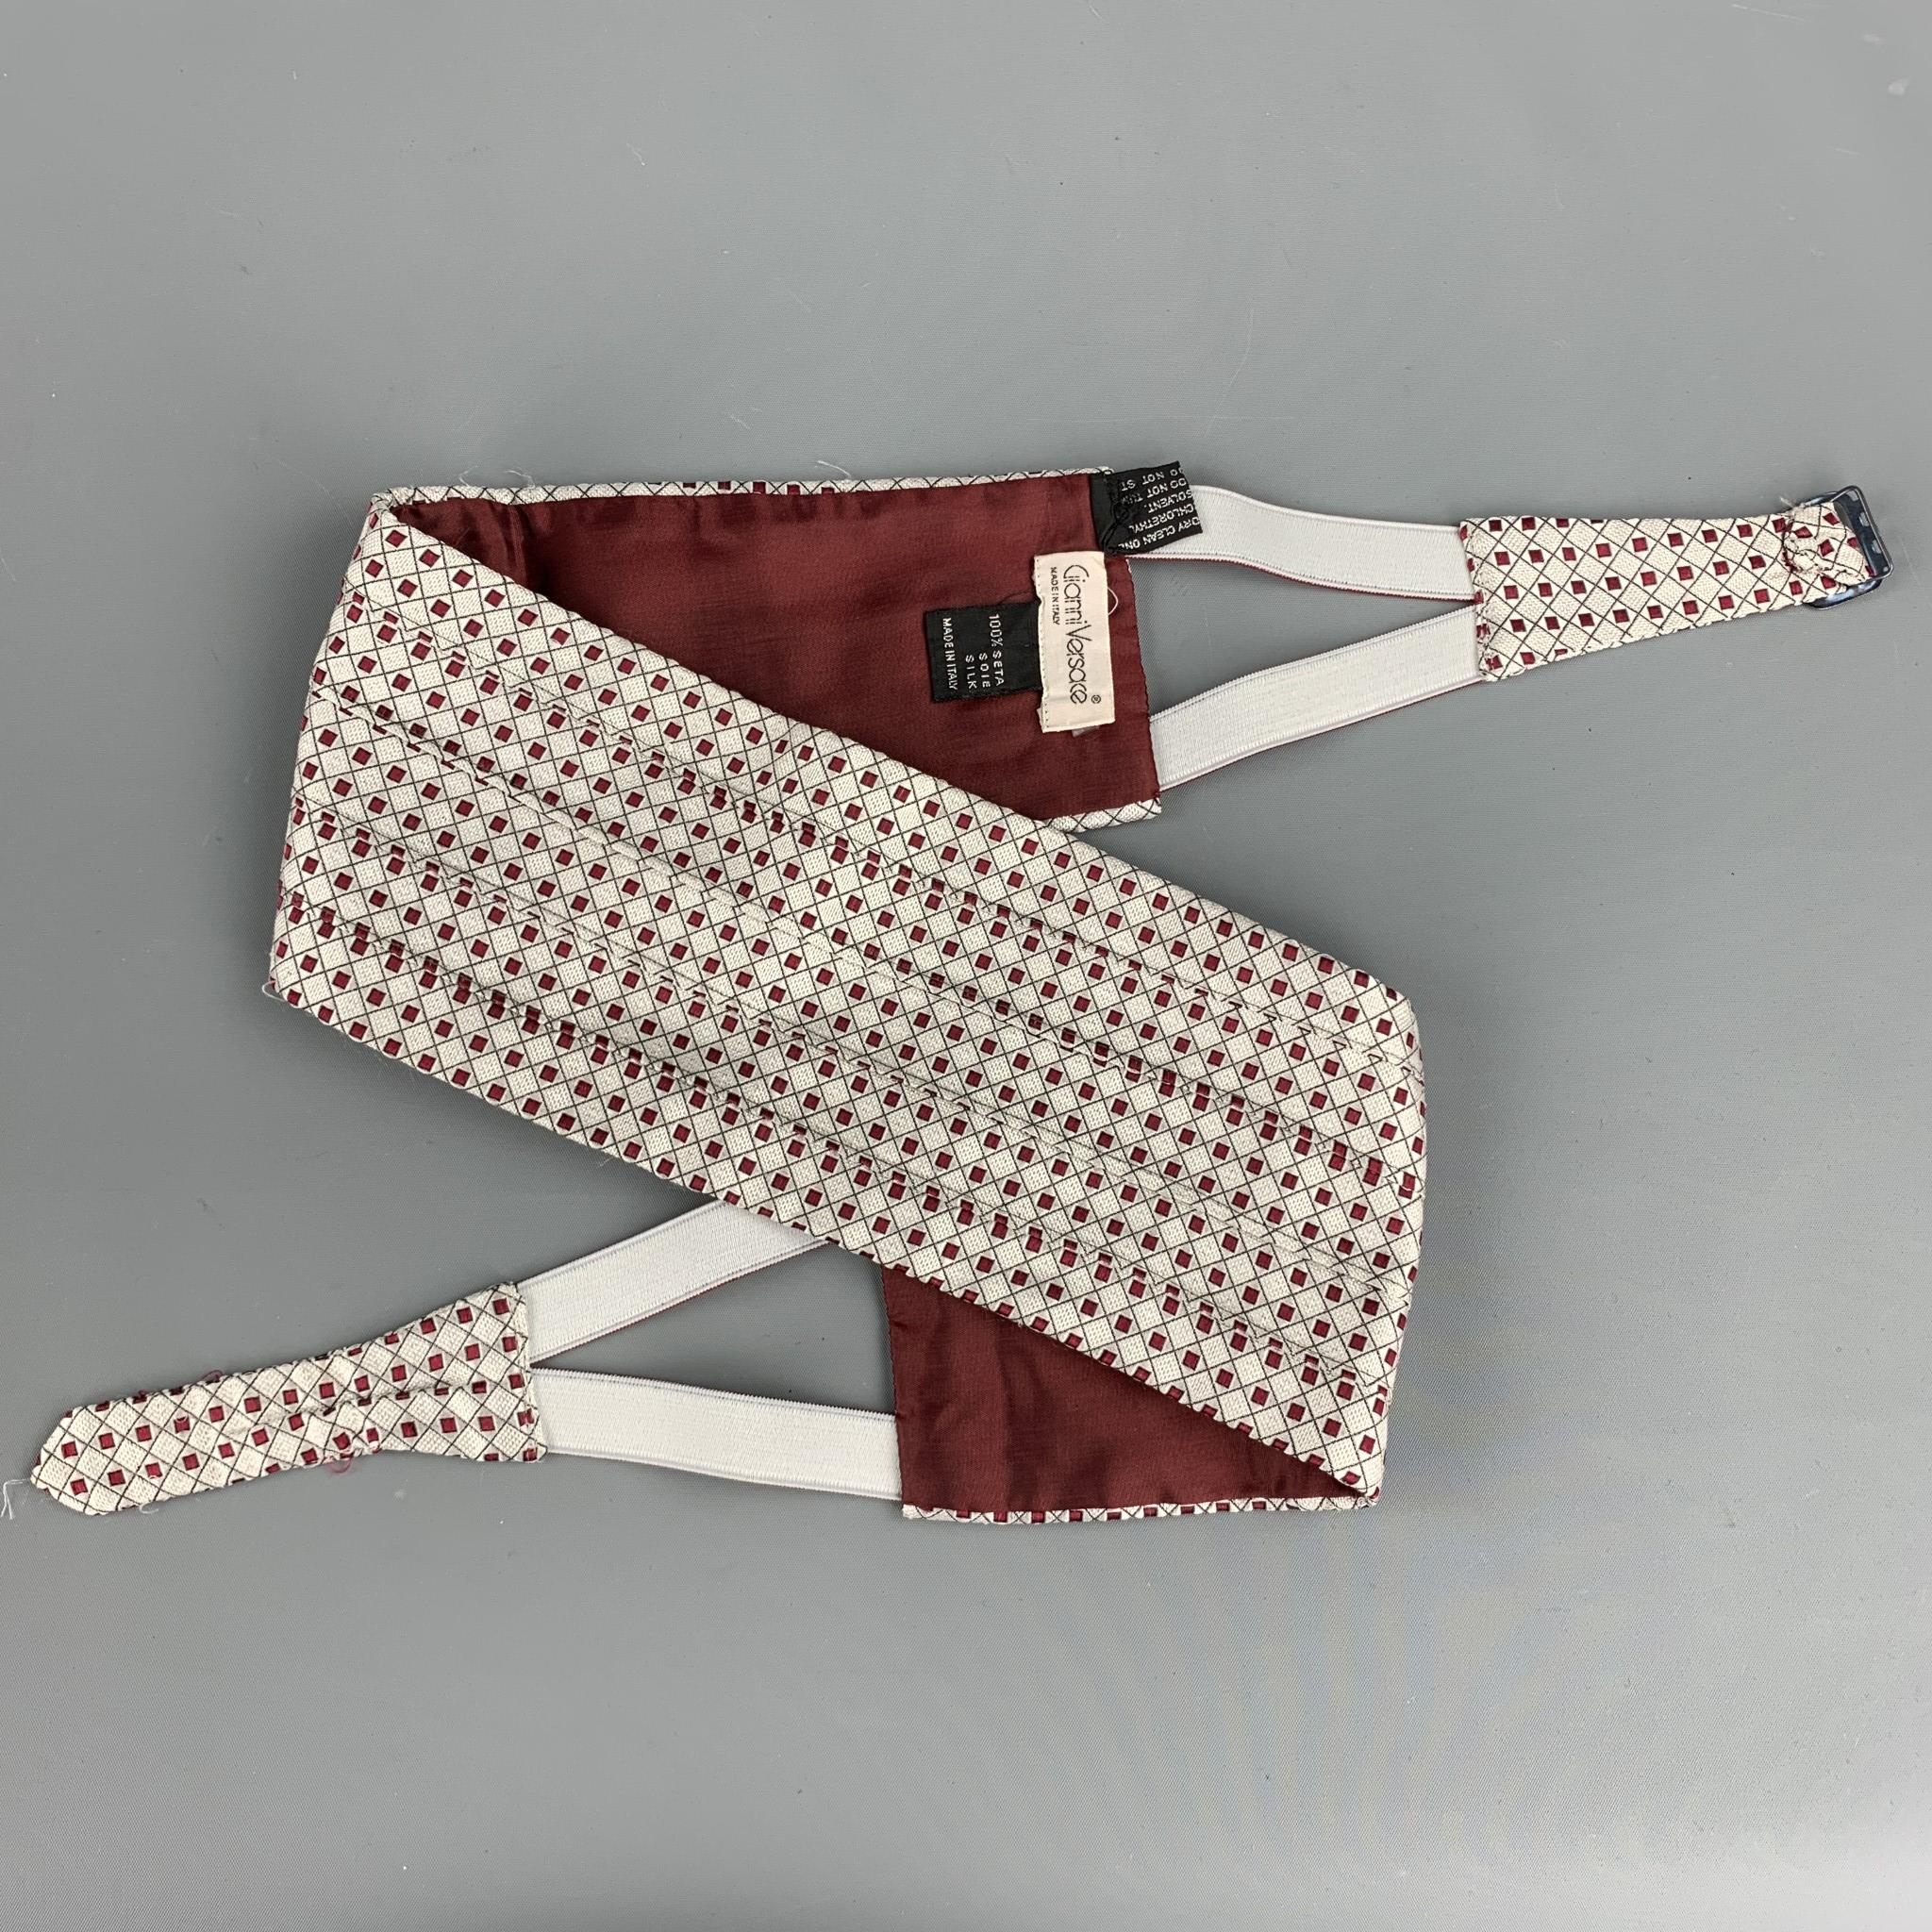 Vintage GIANNI VERSACE cummerbund comes in a silver & burgundy woven silk featuring a buckle closure and includes a matching bow tie. Made in Italy.

Excellent Pre-Owned Condition.

Measurements:

Width: 4 in. 
Length: 39 in. 